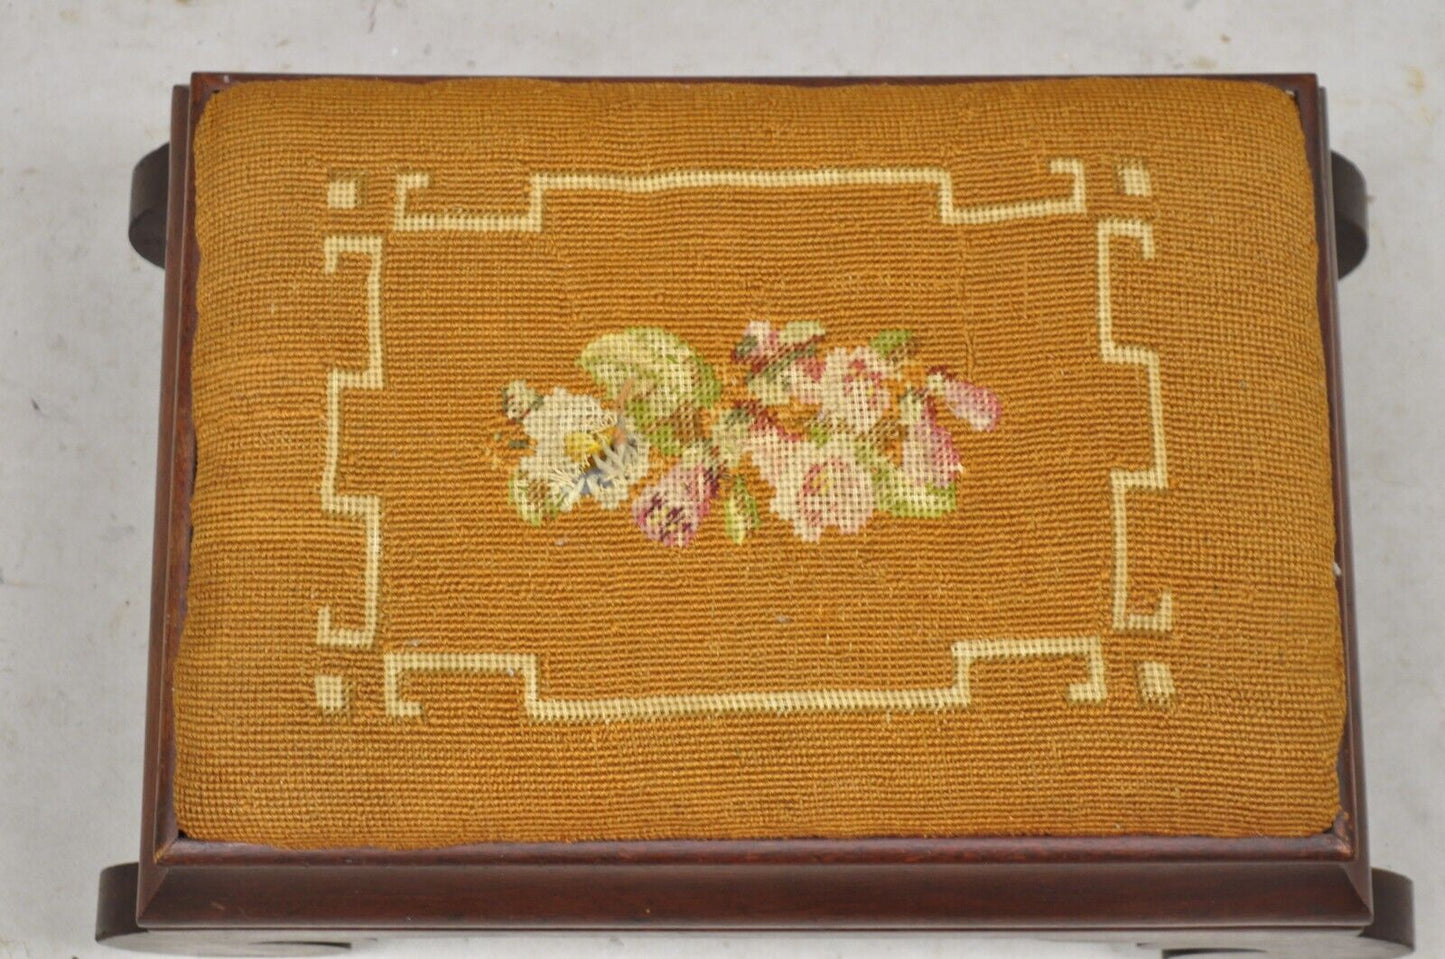 Antique American Empire Mahogany Brown Floral Needlepoint Footstool Ottoman